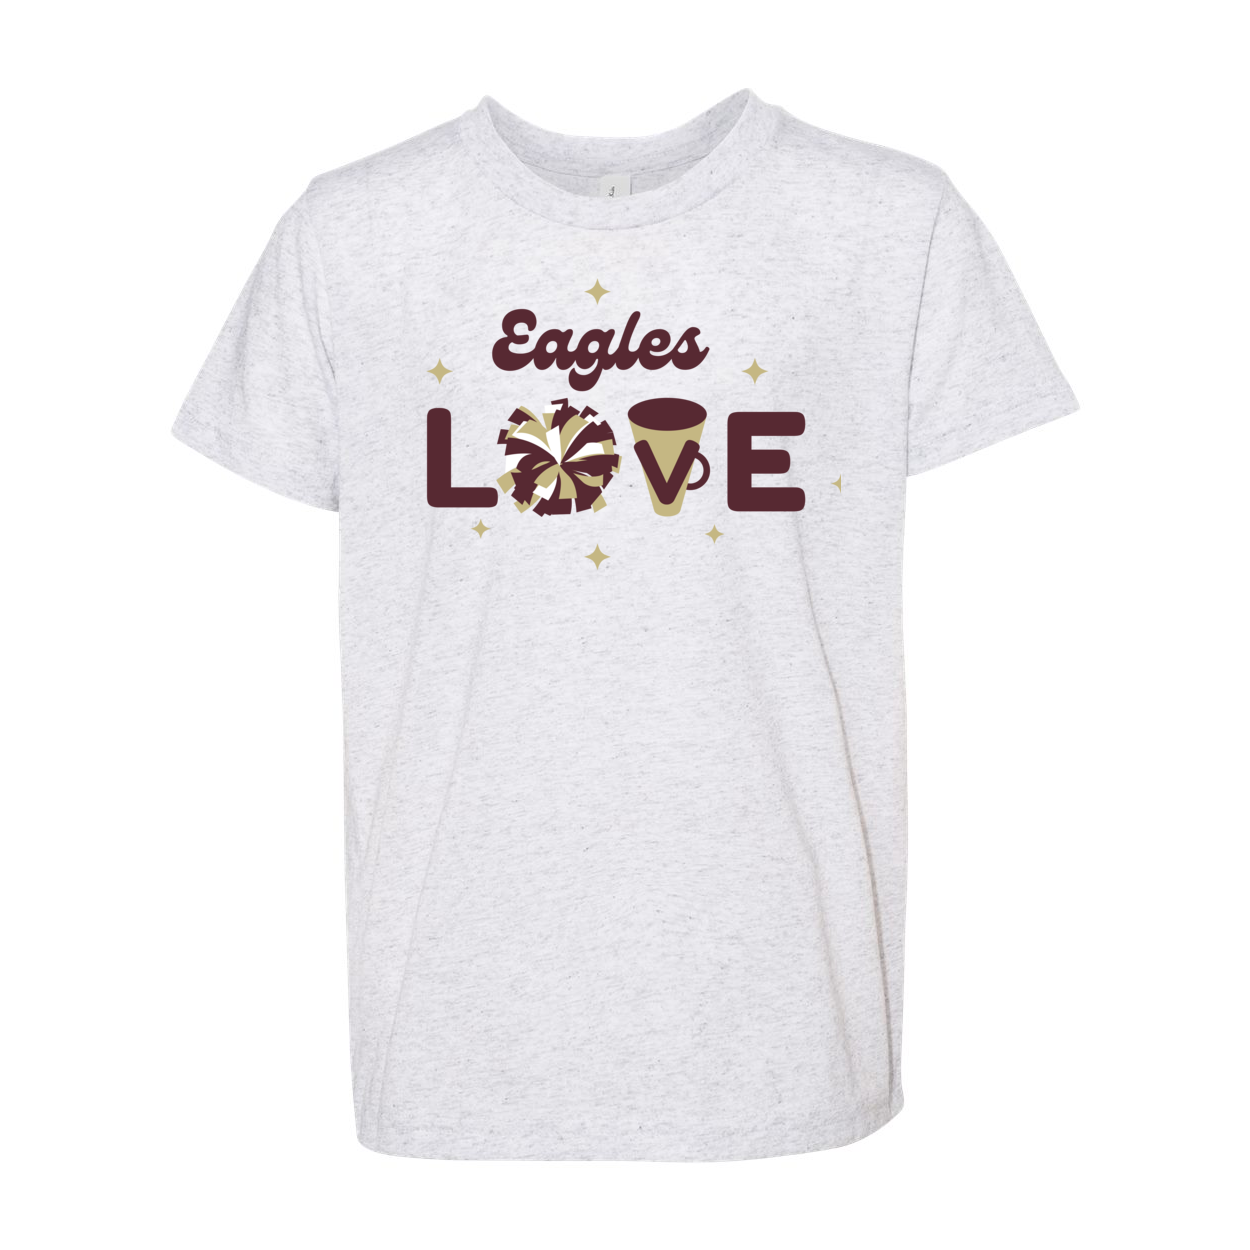 Youth Super Soft Eagles Cheer Love Short Sleeve Graphic Tee - New Albany Eagles